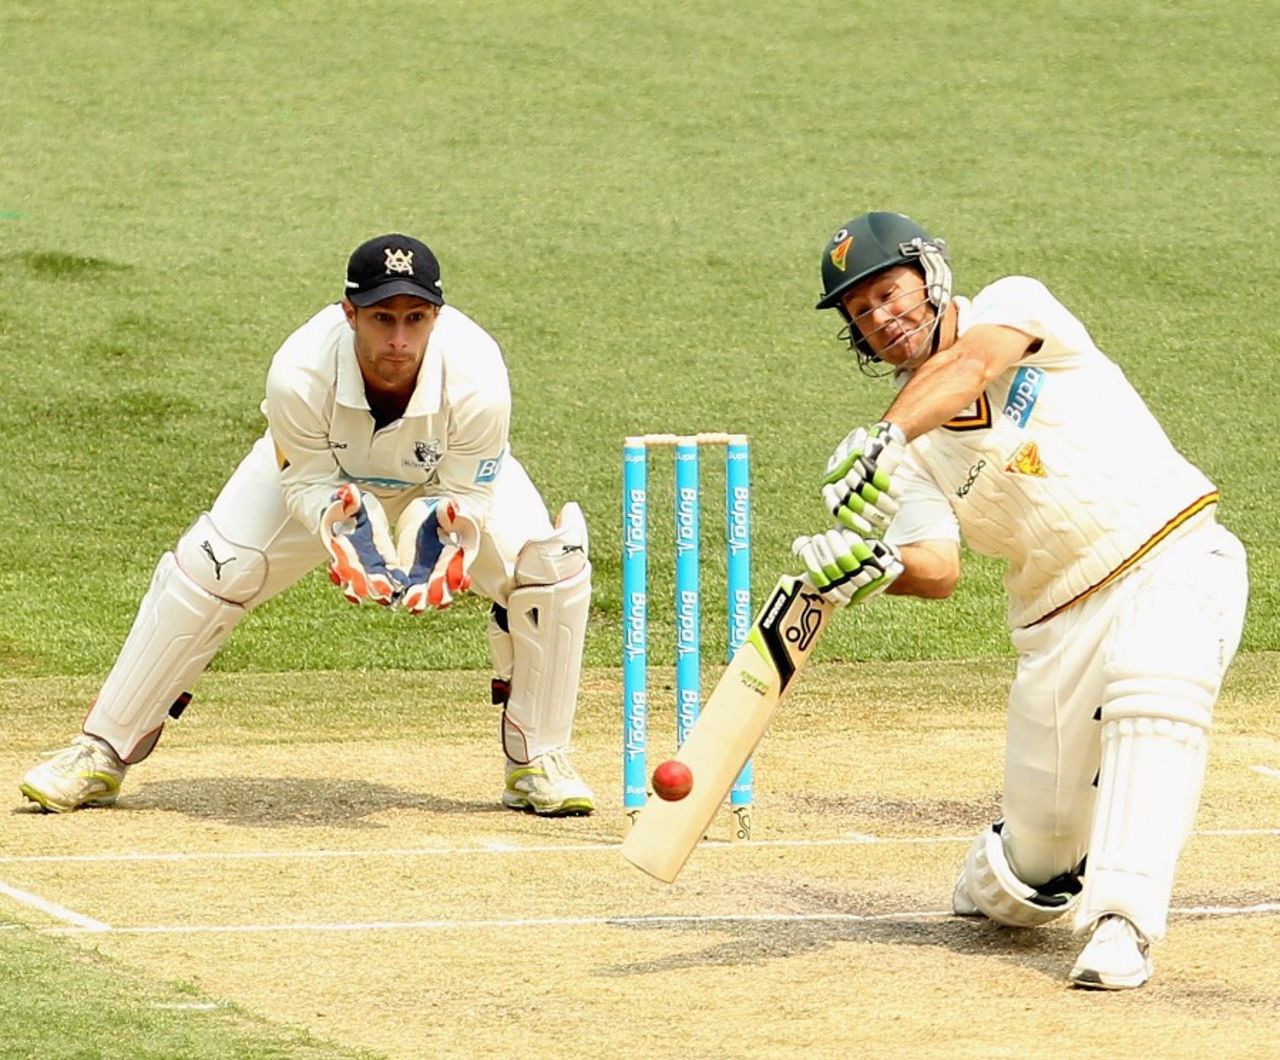 Ricky Ponting drives through the off side, Victoria v Tasmania, Sheffield Shield, Melbourne, 2nd day, October 24, 2012